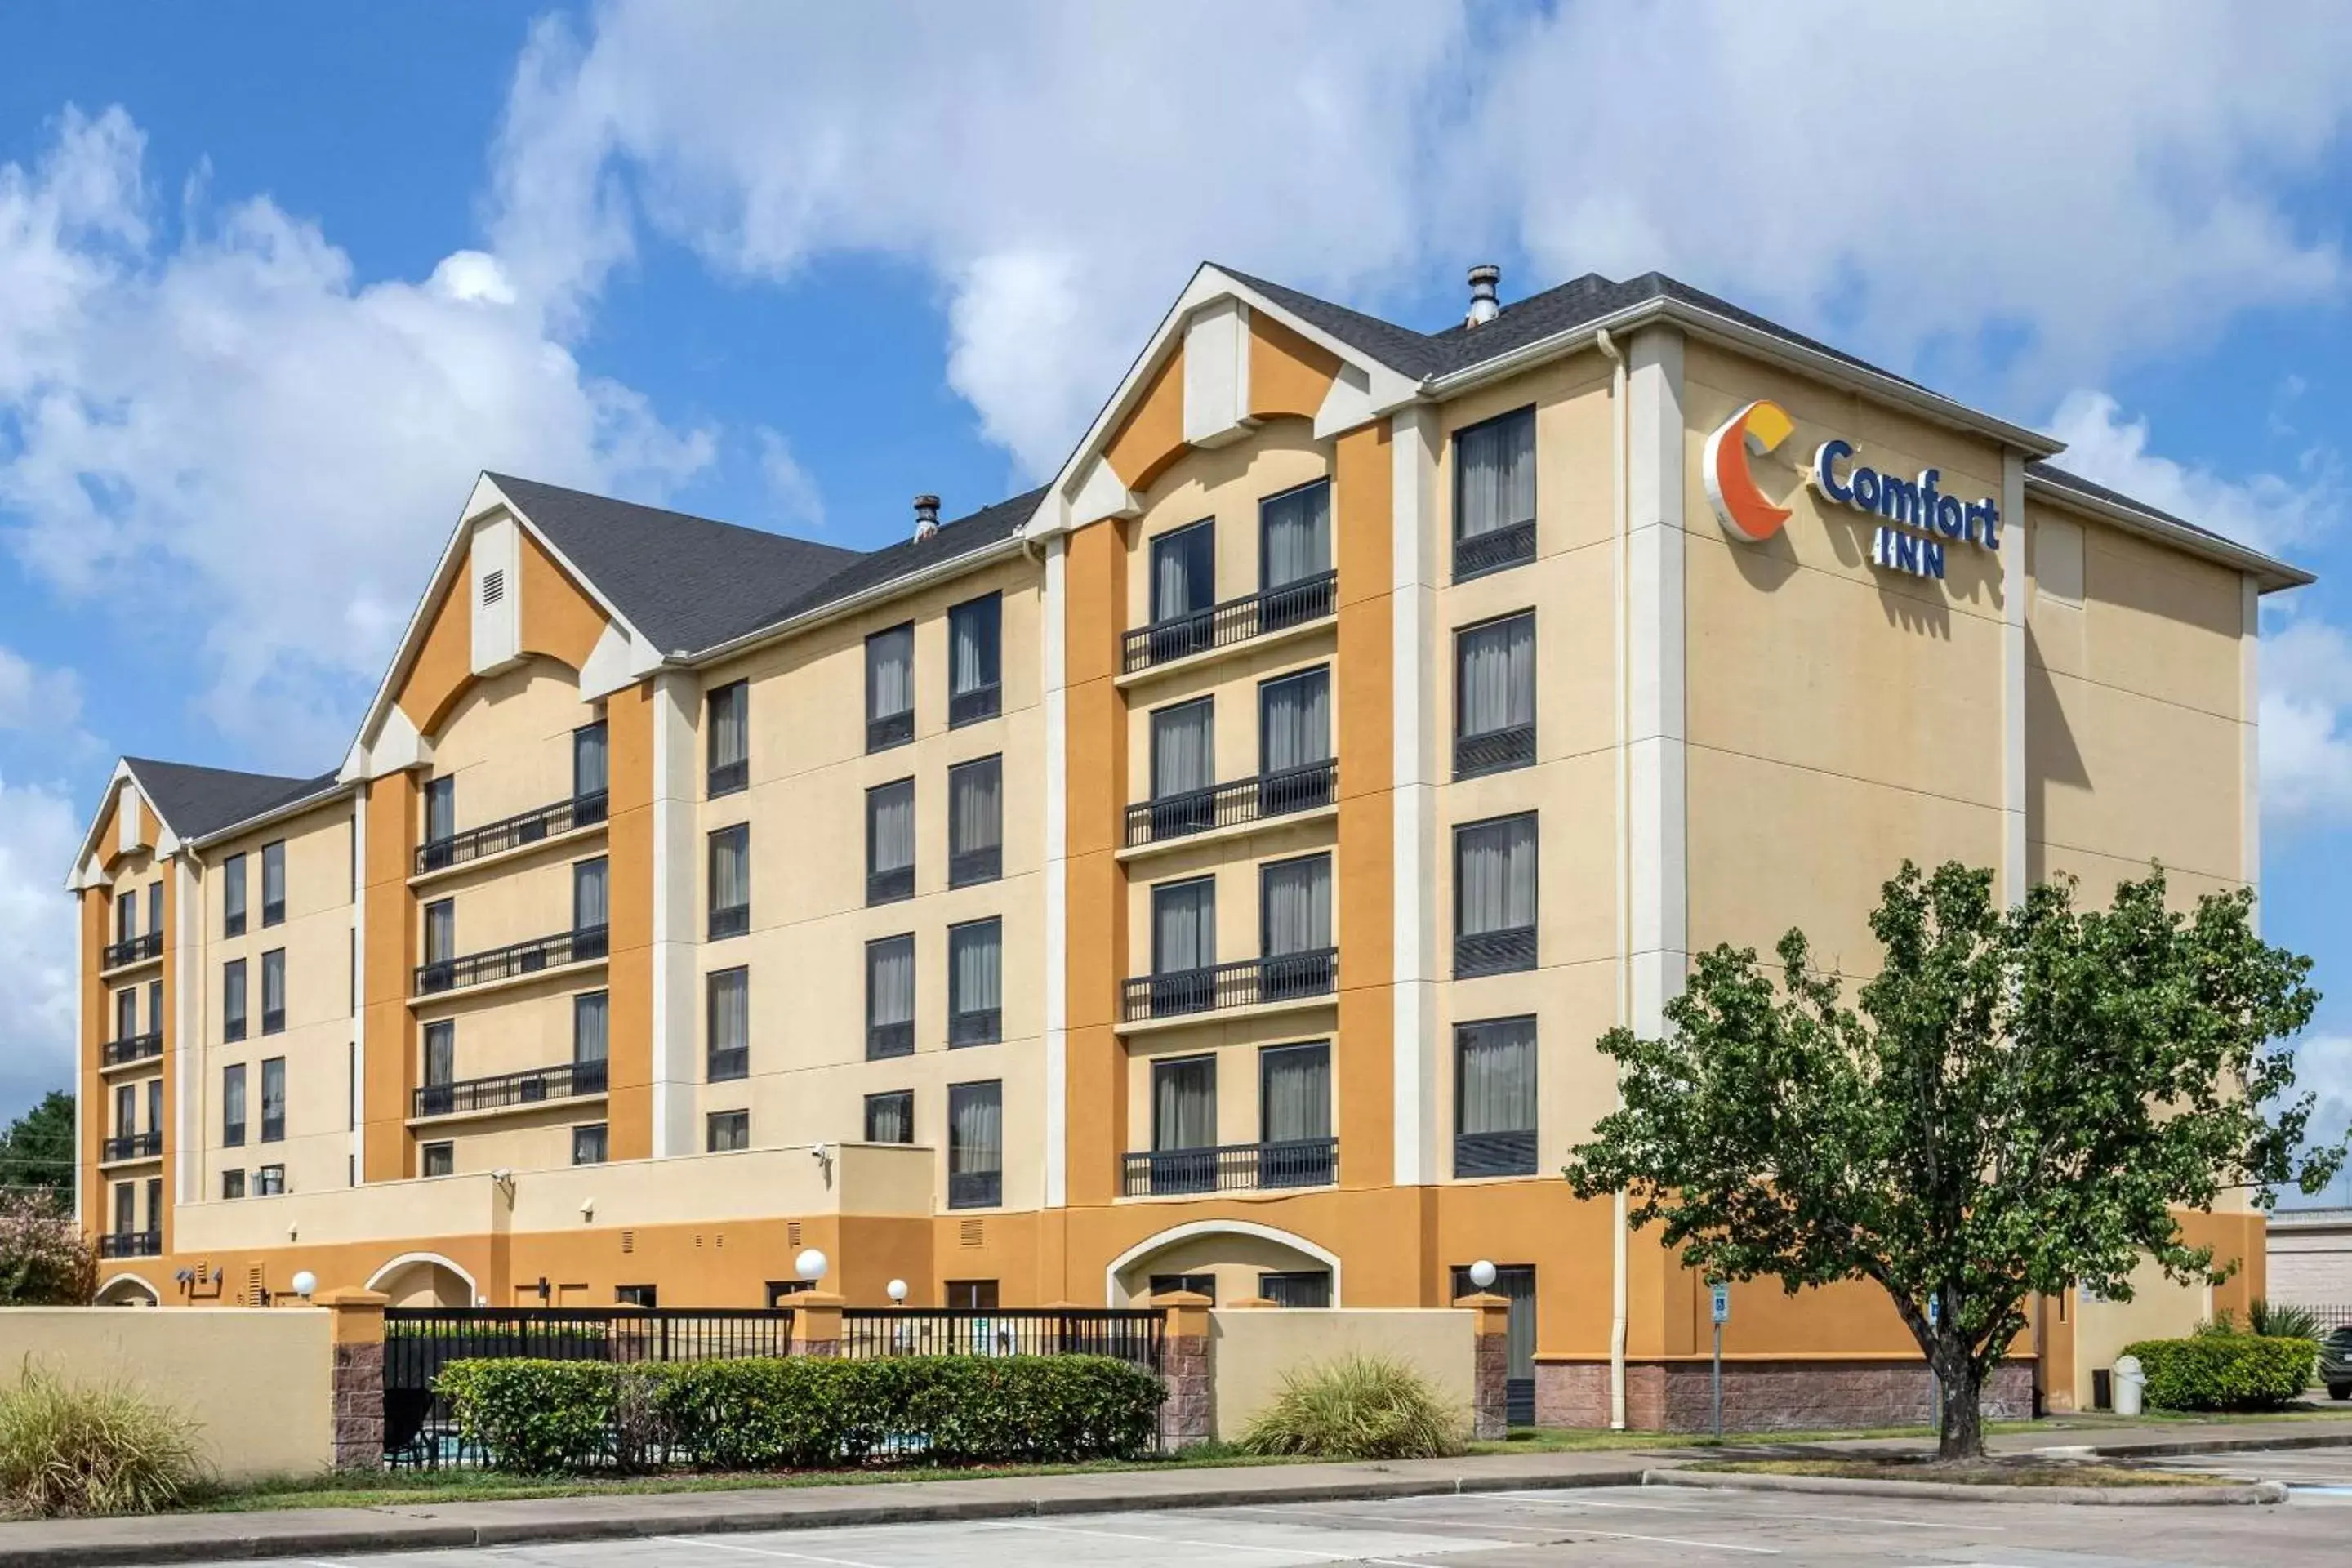 Property Building in Comfort Inn 290/NW